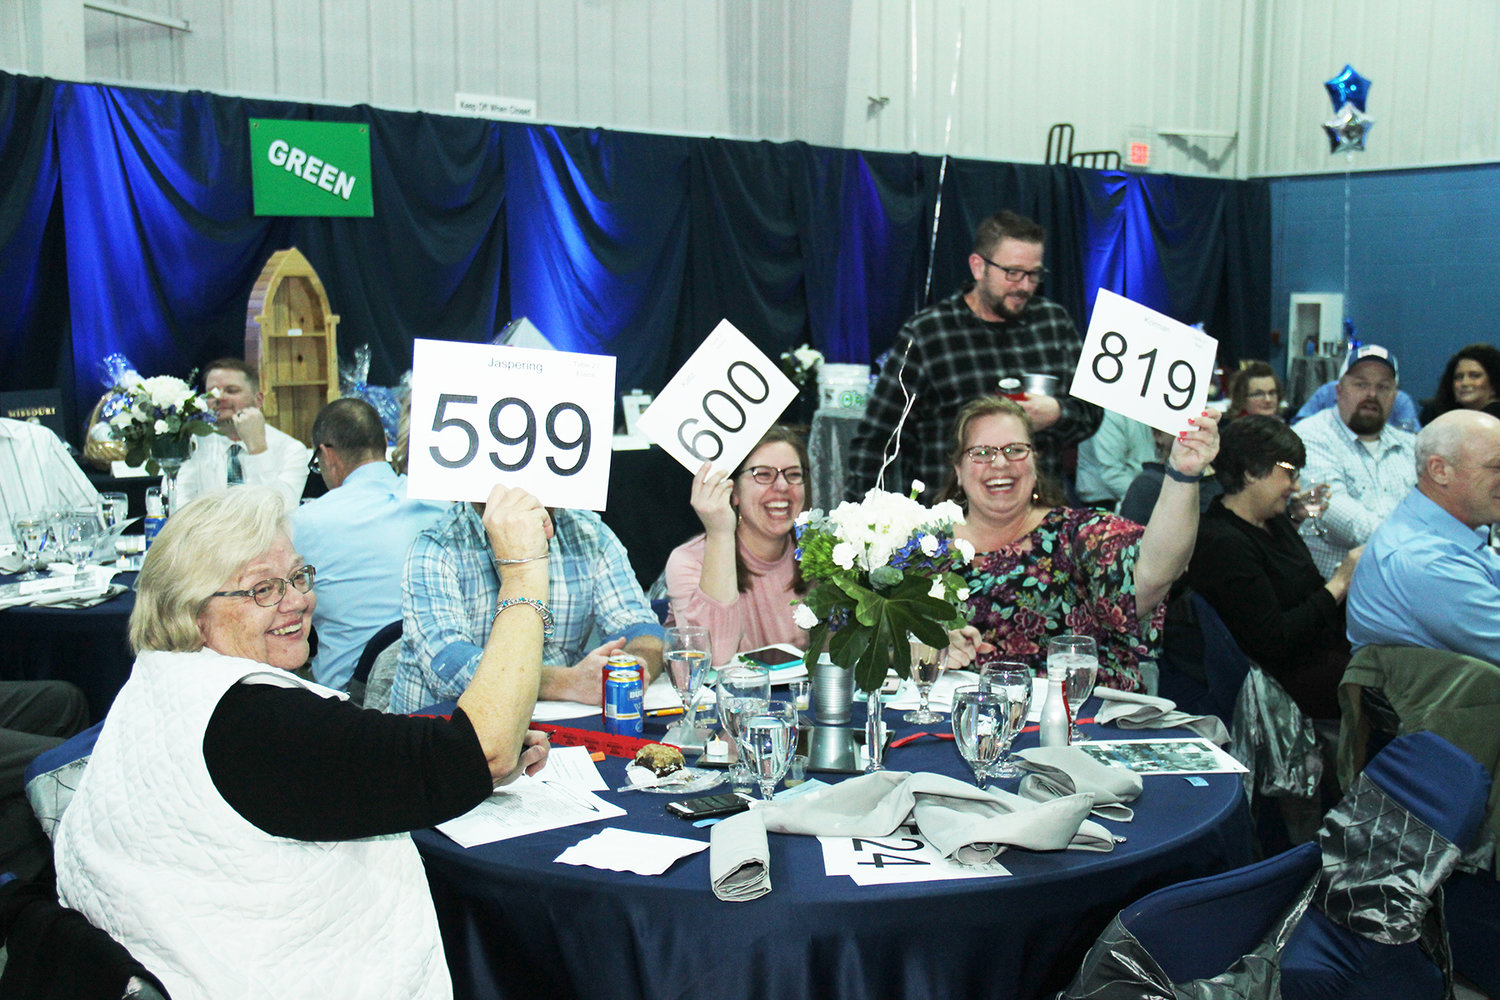 AUCTION RETURNS — Holy Rosary School will once again host an in-person dinner and auction Jan. 29 to raise funds in support of the school. Pictured here, bidders at the 2020 auction compete for an item.